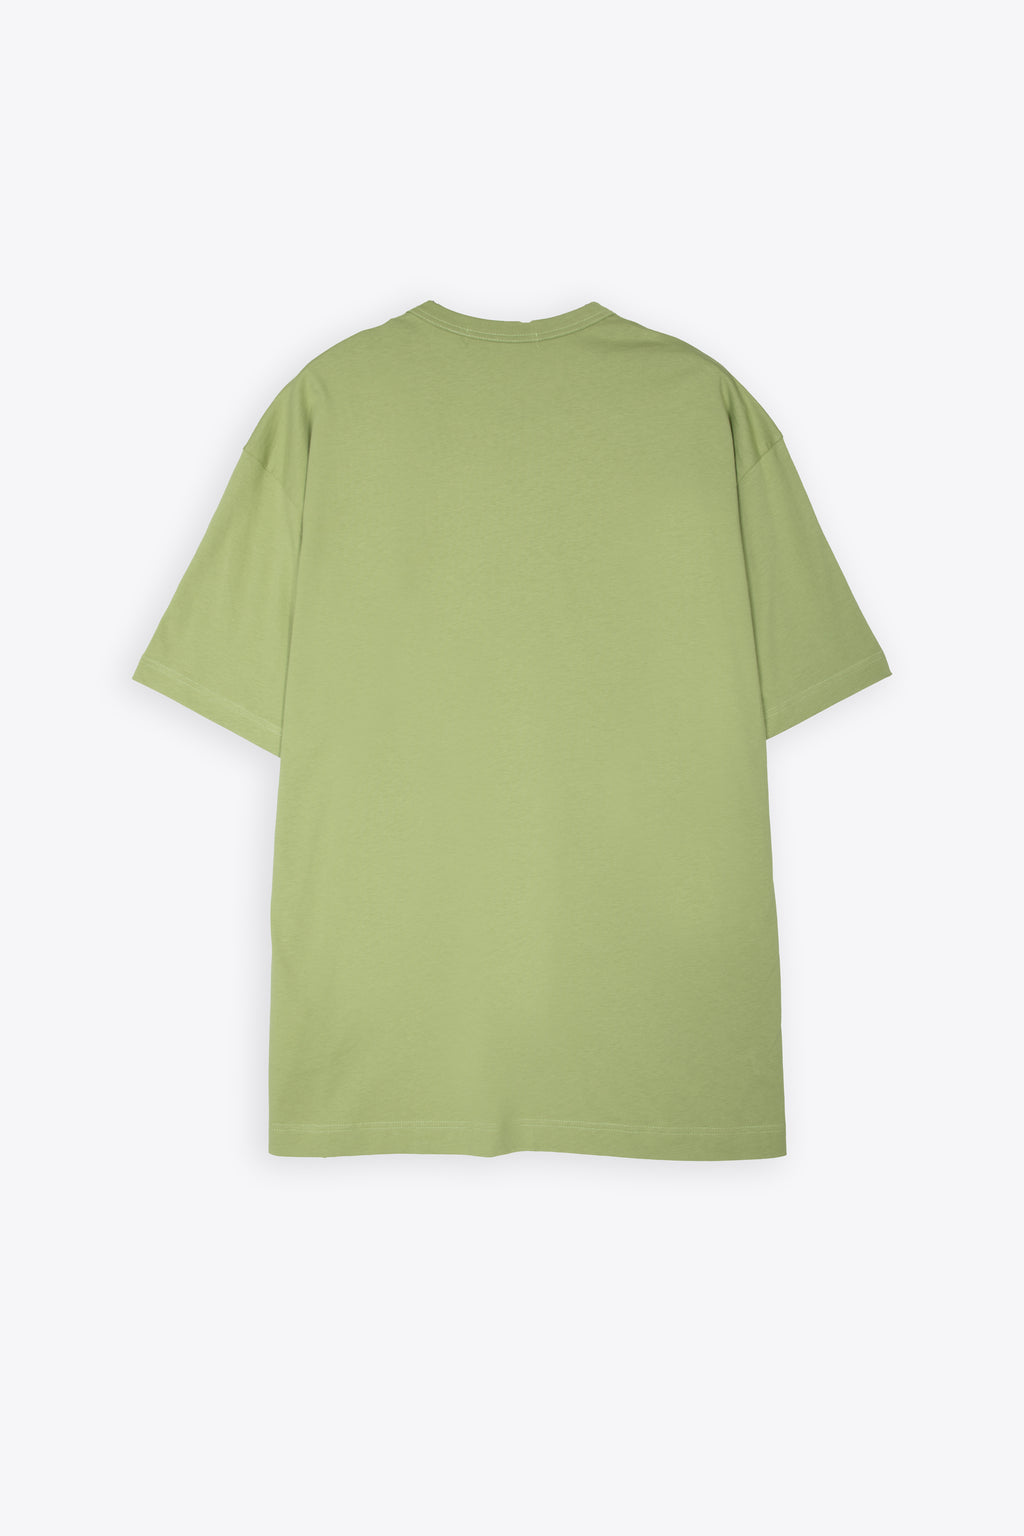 alt-image__Green-cotton-oversize-t-shirt-with-chest-logo